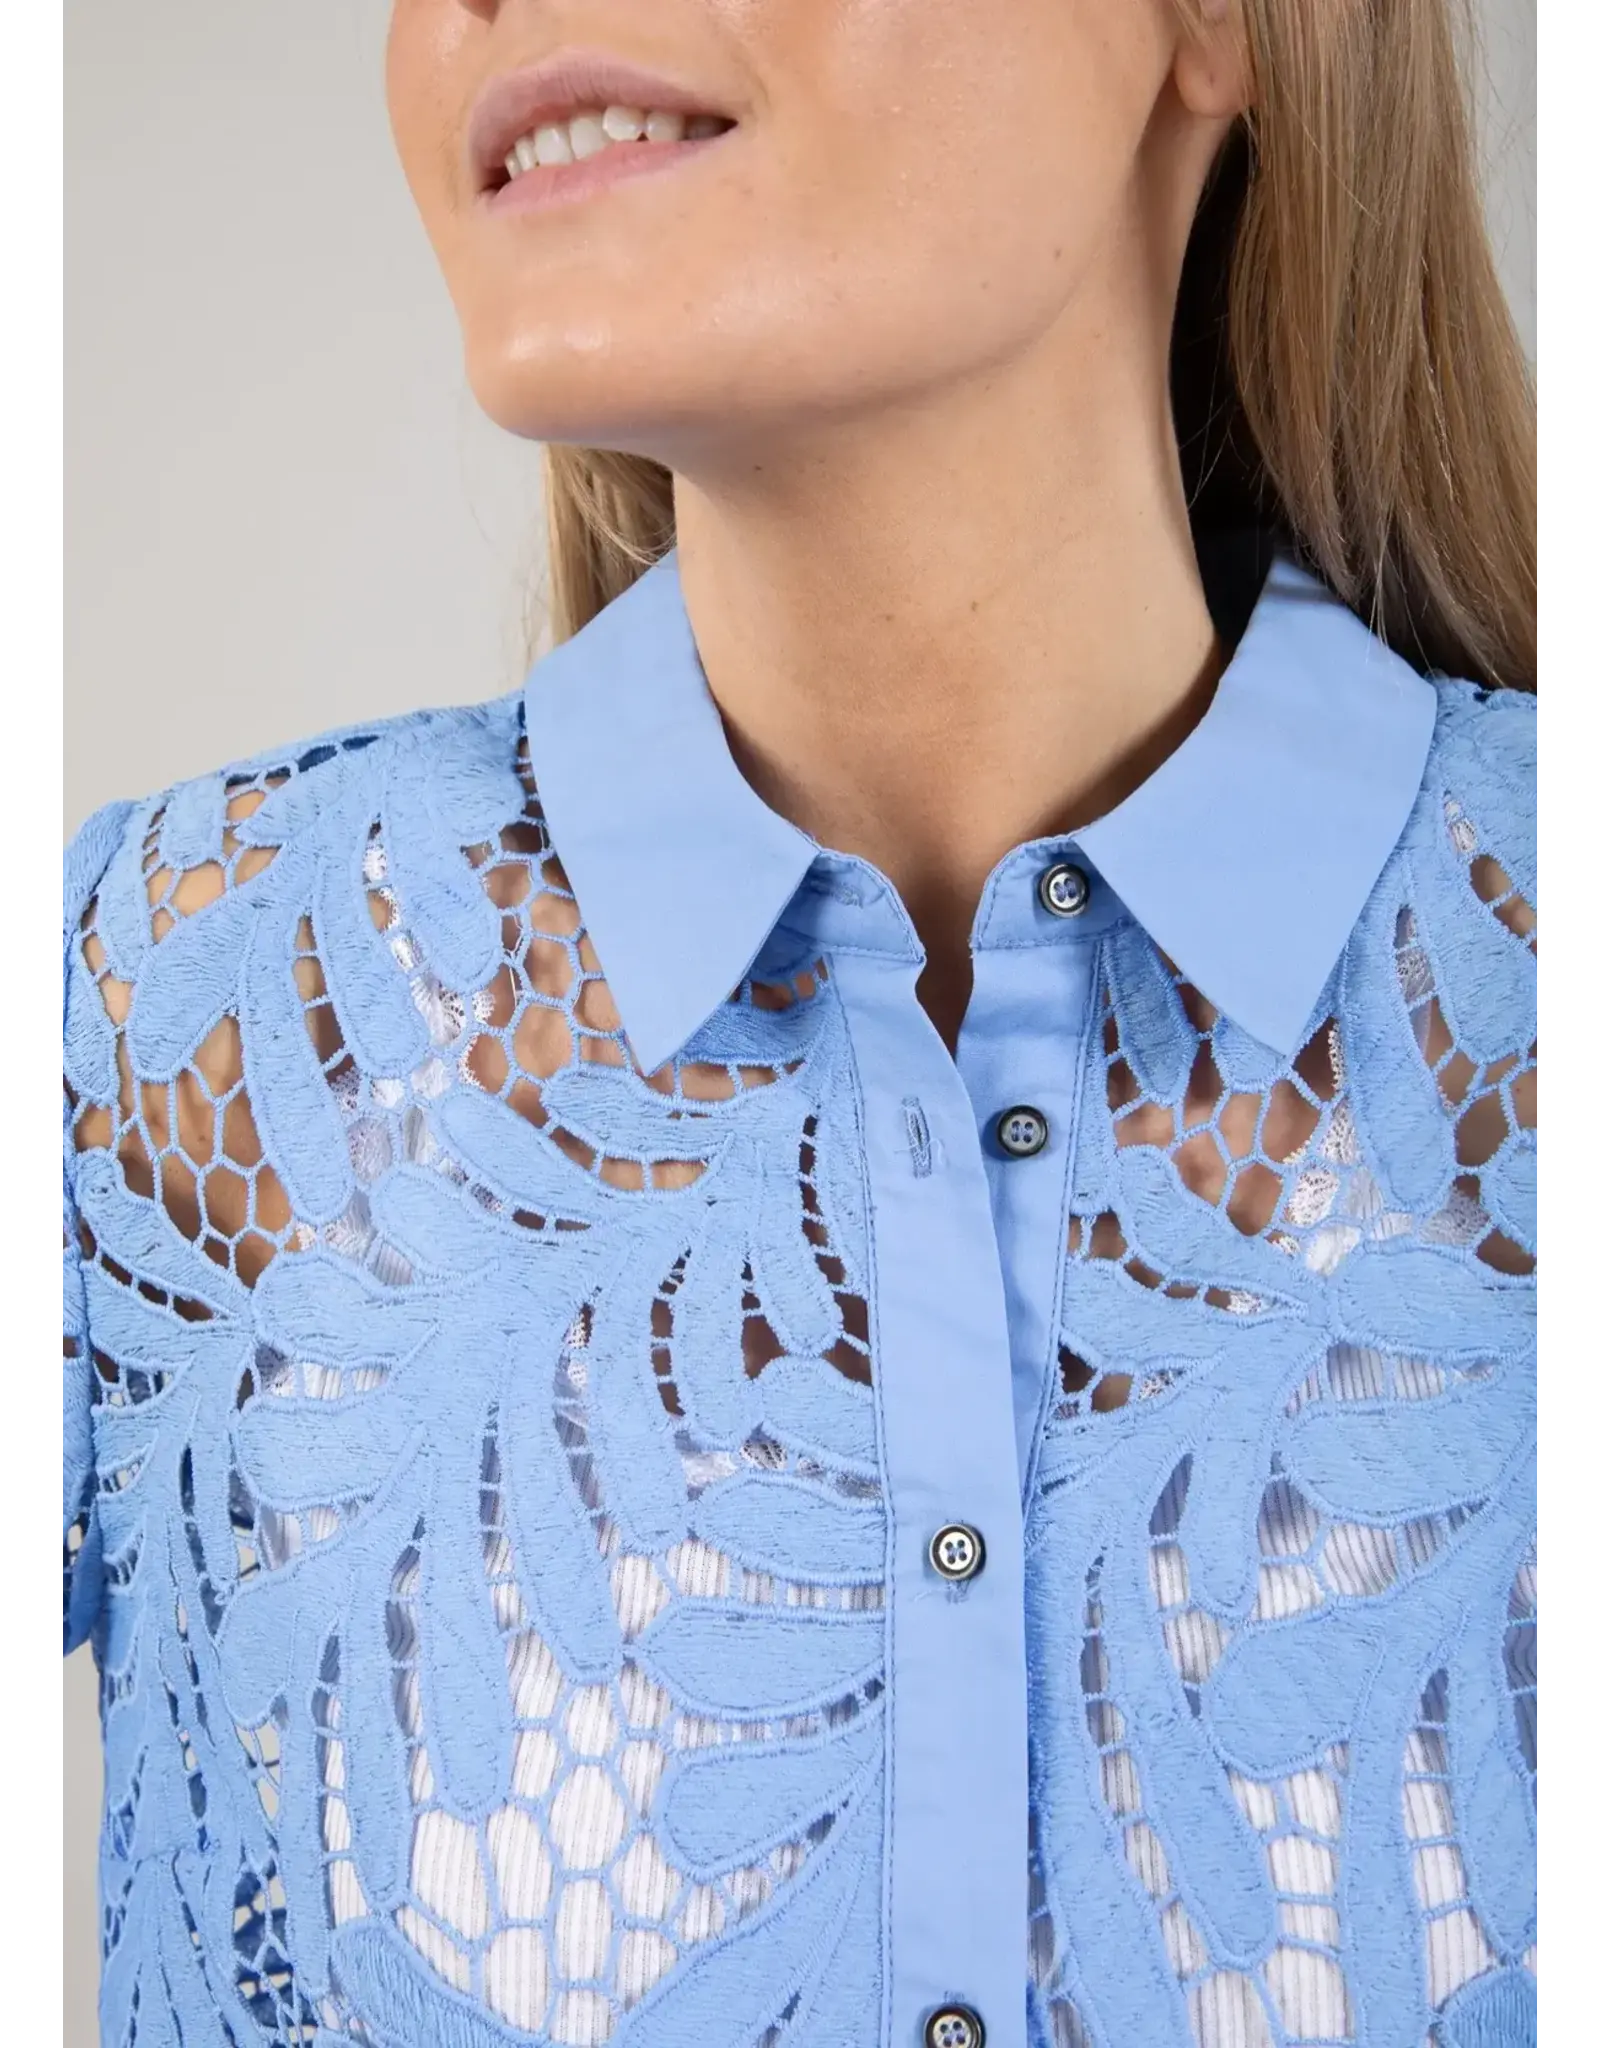 coster copenhagen 242-1250 LACE SHIRT BRIGHT DKY BLUE